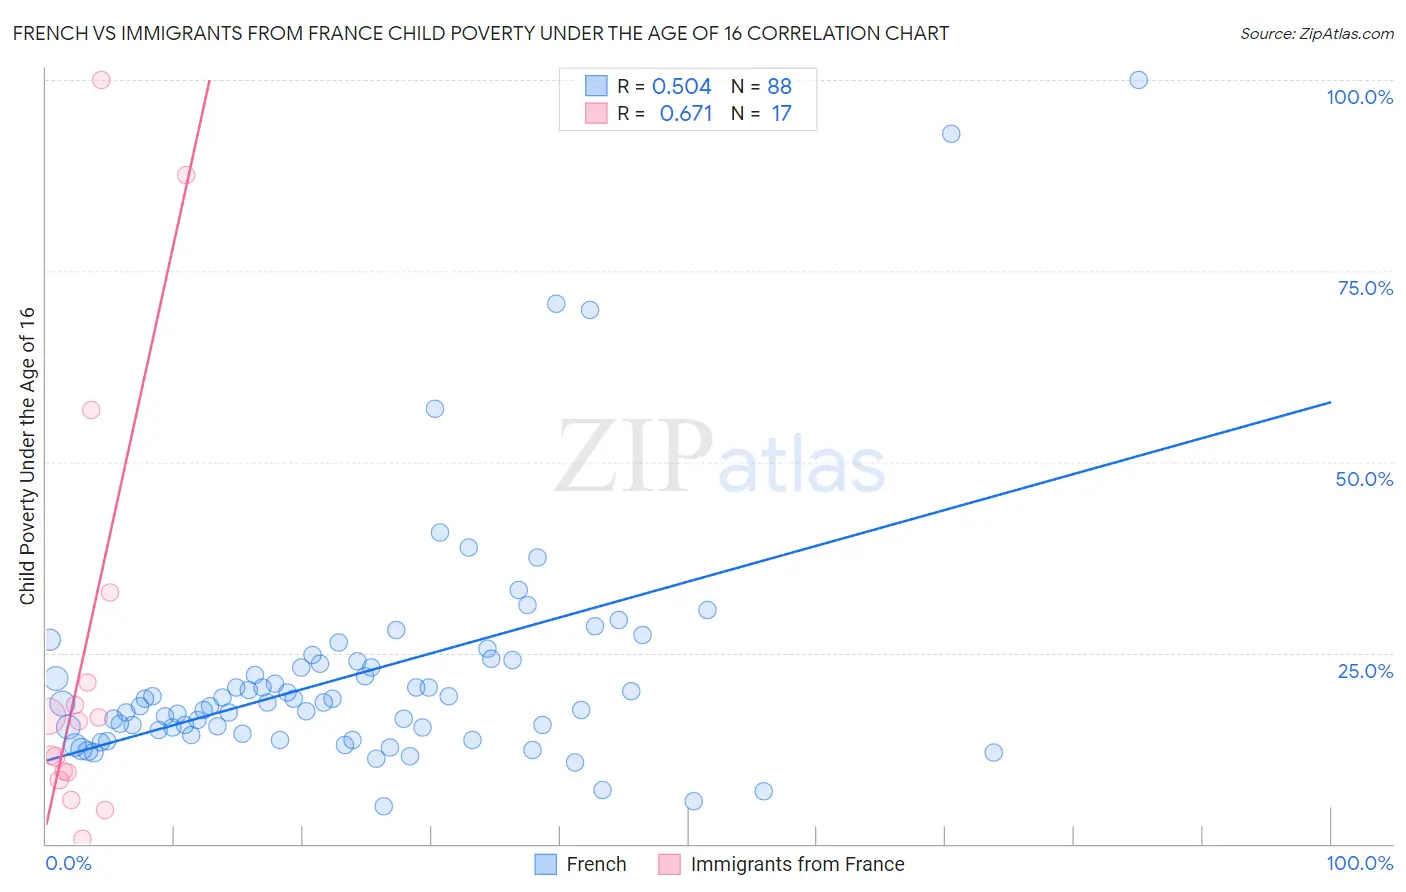 French vs Immigrants from France Child Poverty Under the Age of 16